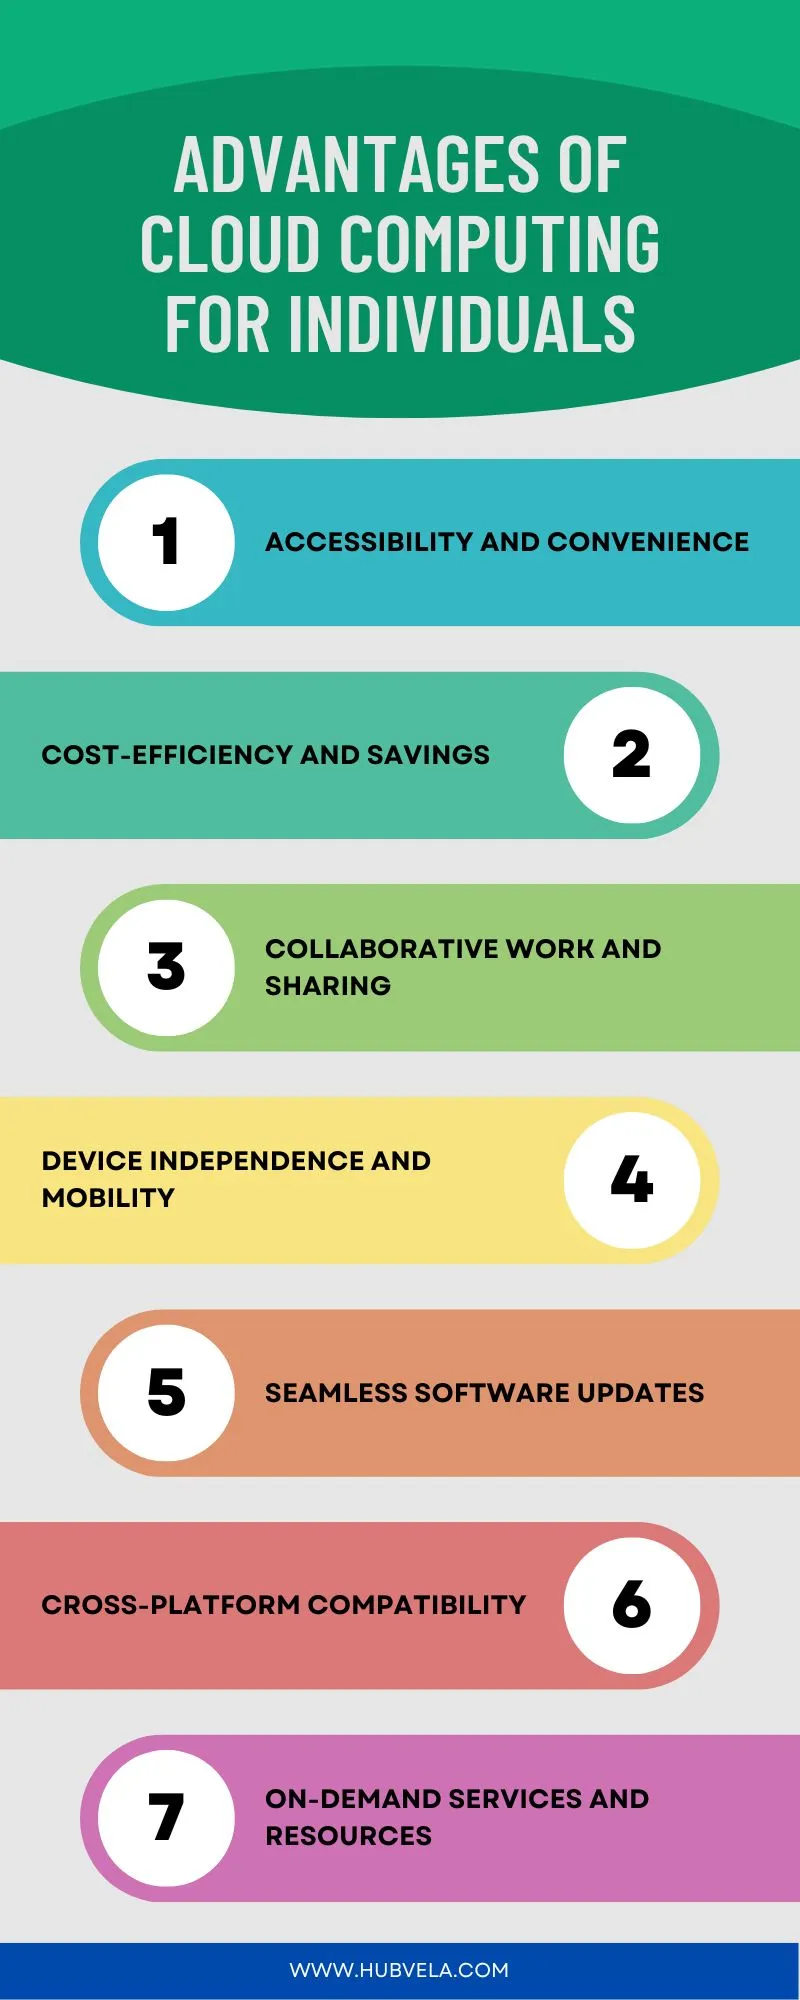 Advantages of Cloud Computing for Individuals Infographic